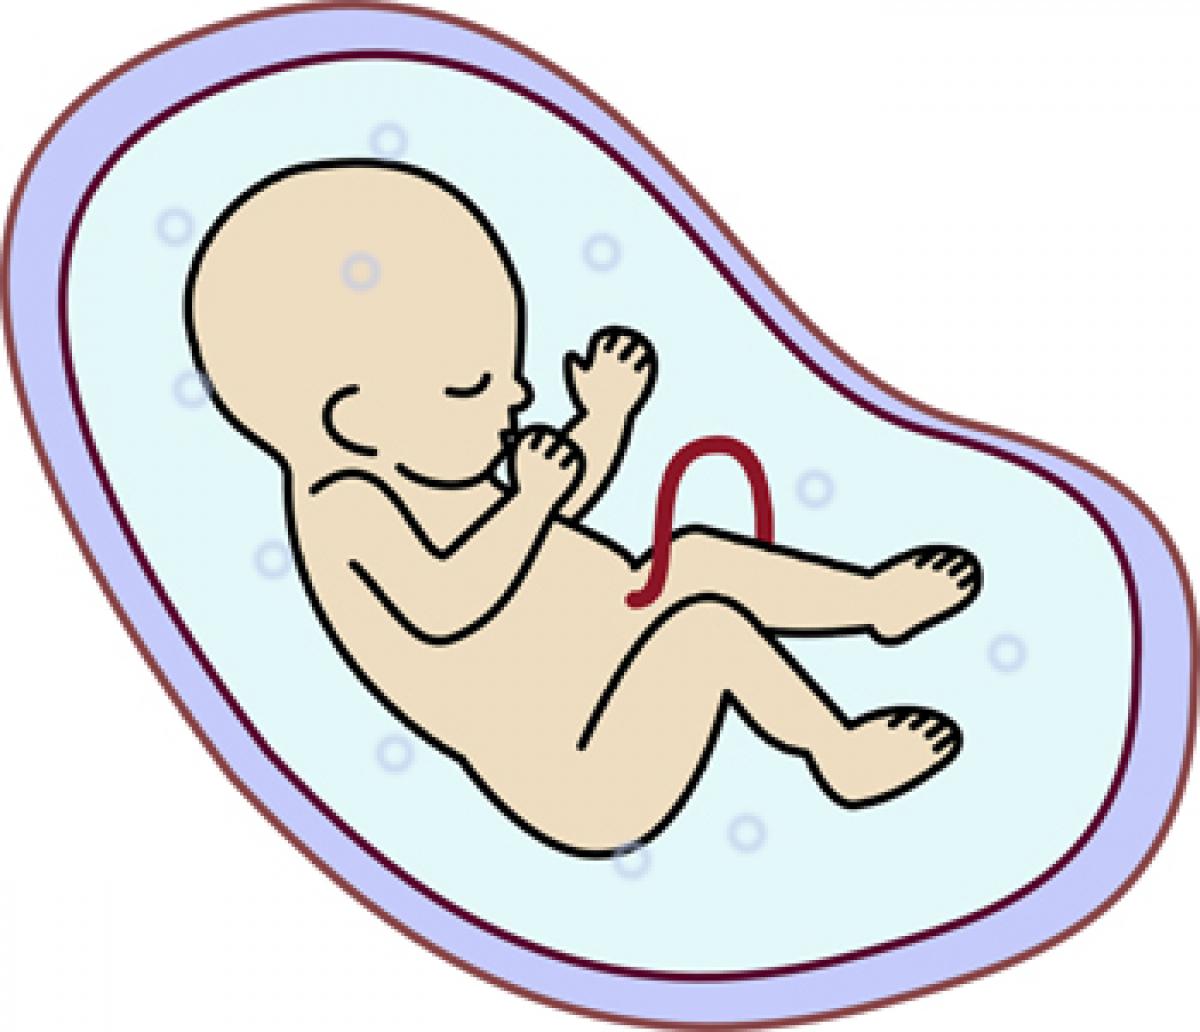 How foetal cells affect mothers health?